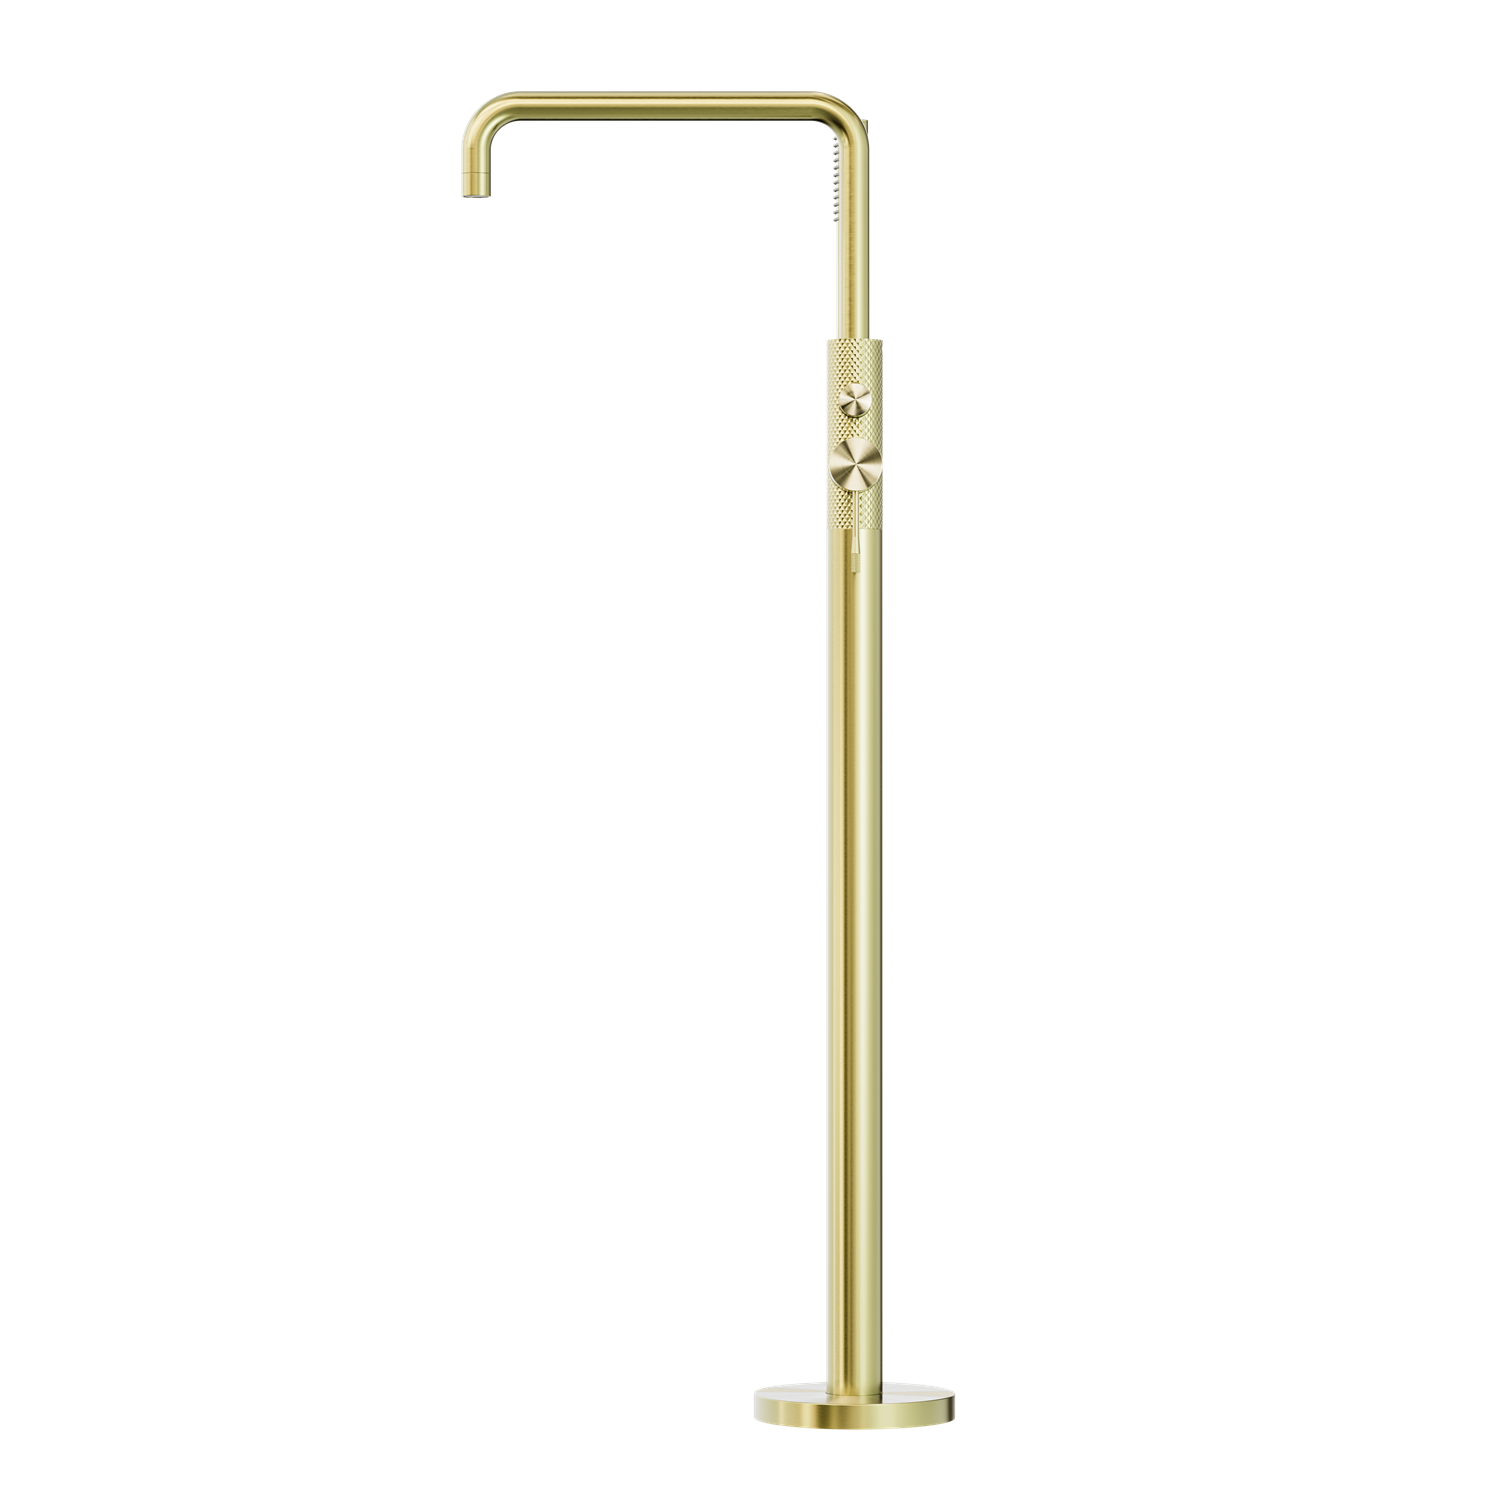 NERO OPAL FREESTANDING BATH MIXER WITH HAND SHOWER 1055MM BRUSHED GOLD